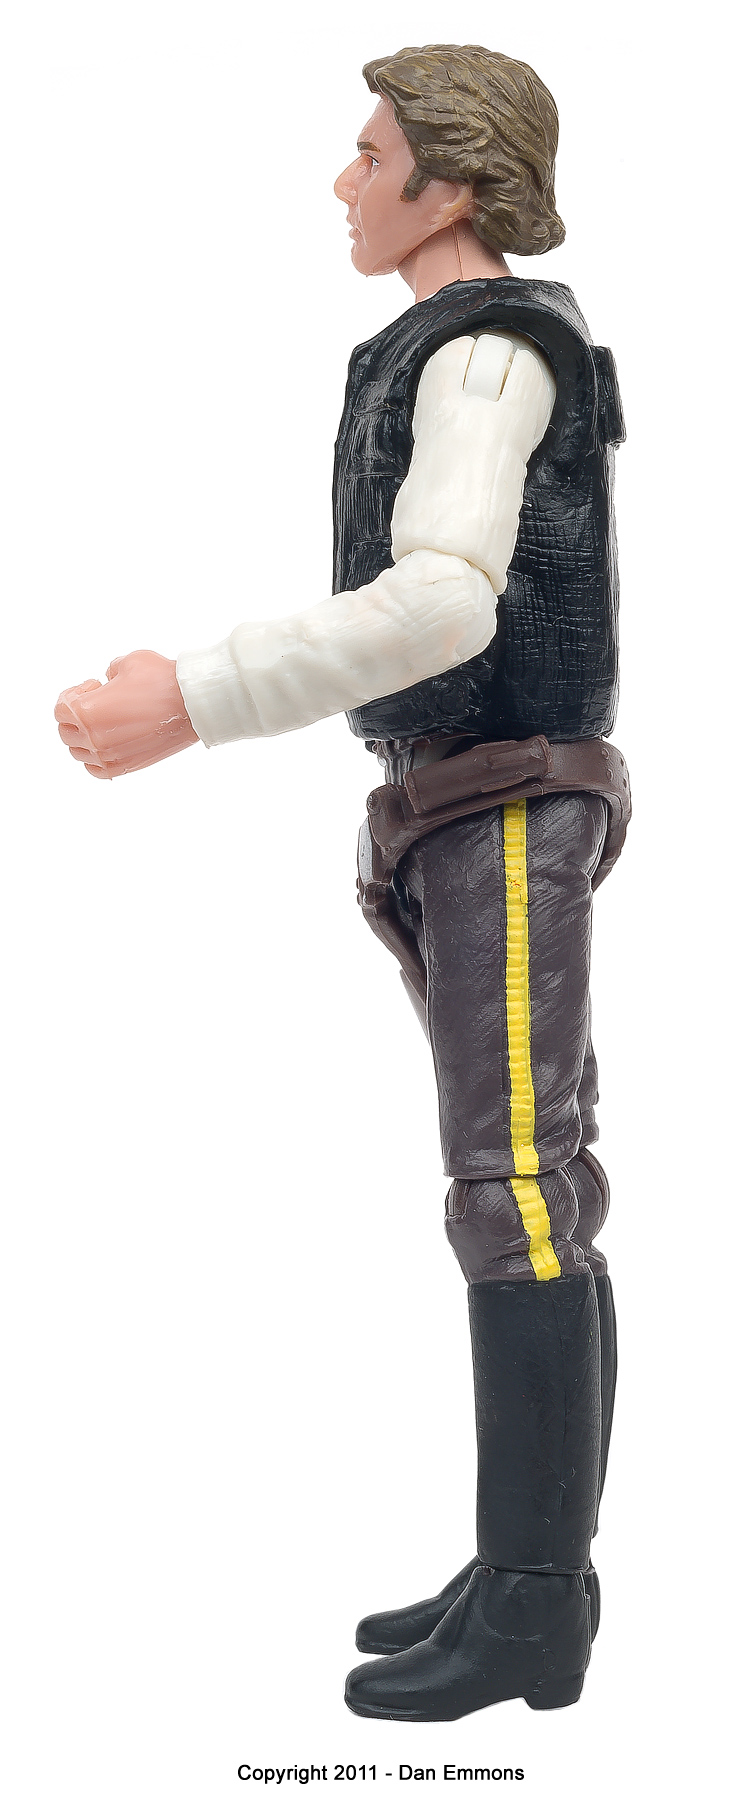 The Vintage Collection - VC62: Han Solo (In Trench Coat)